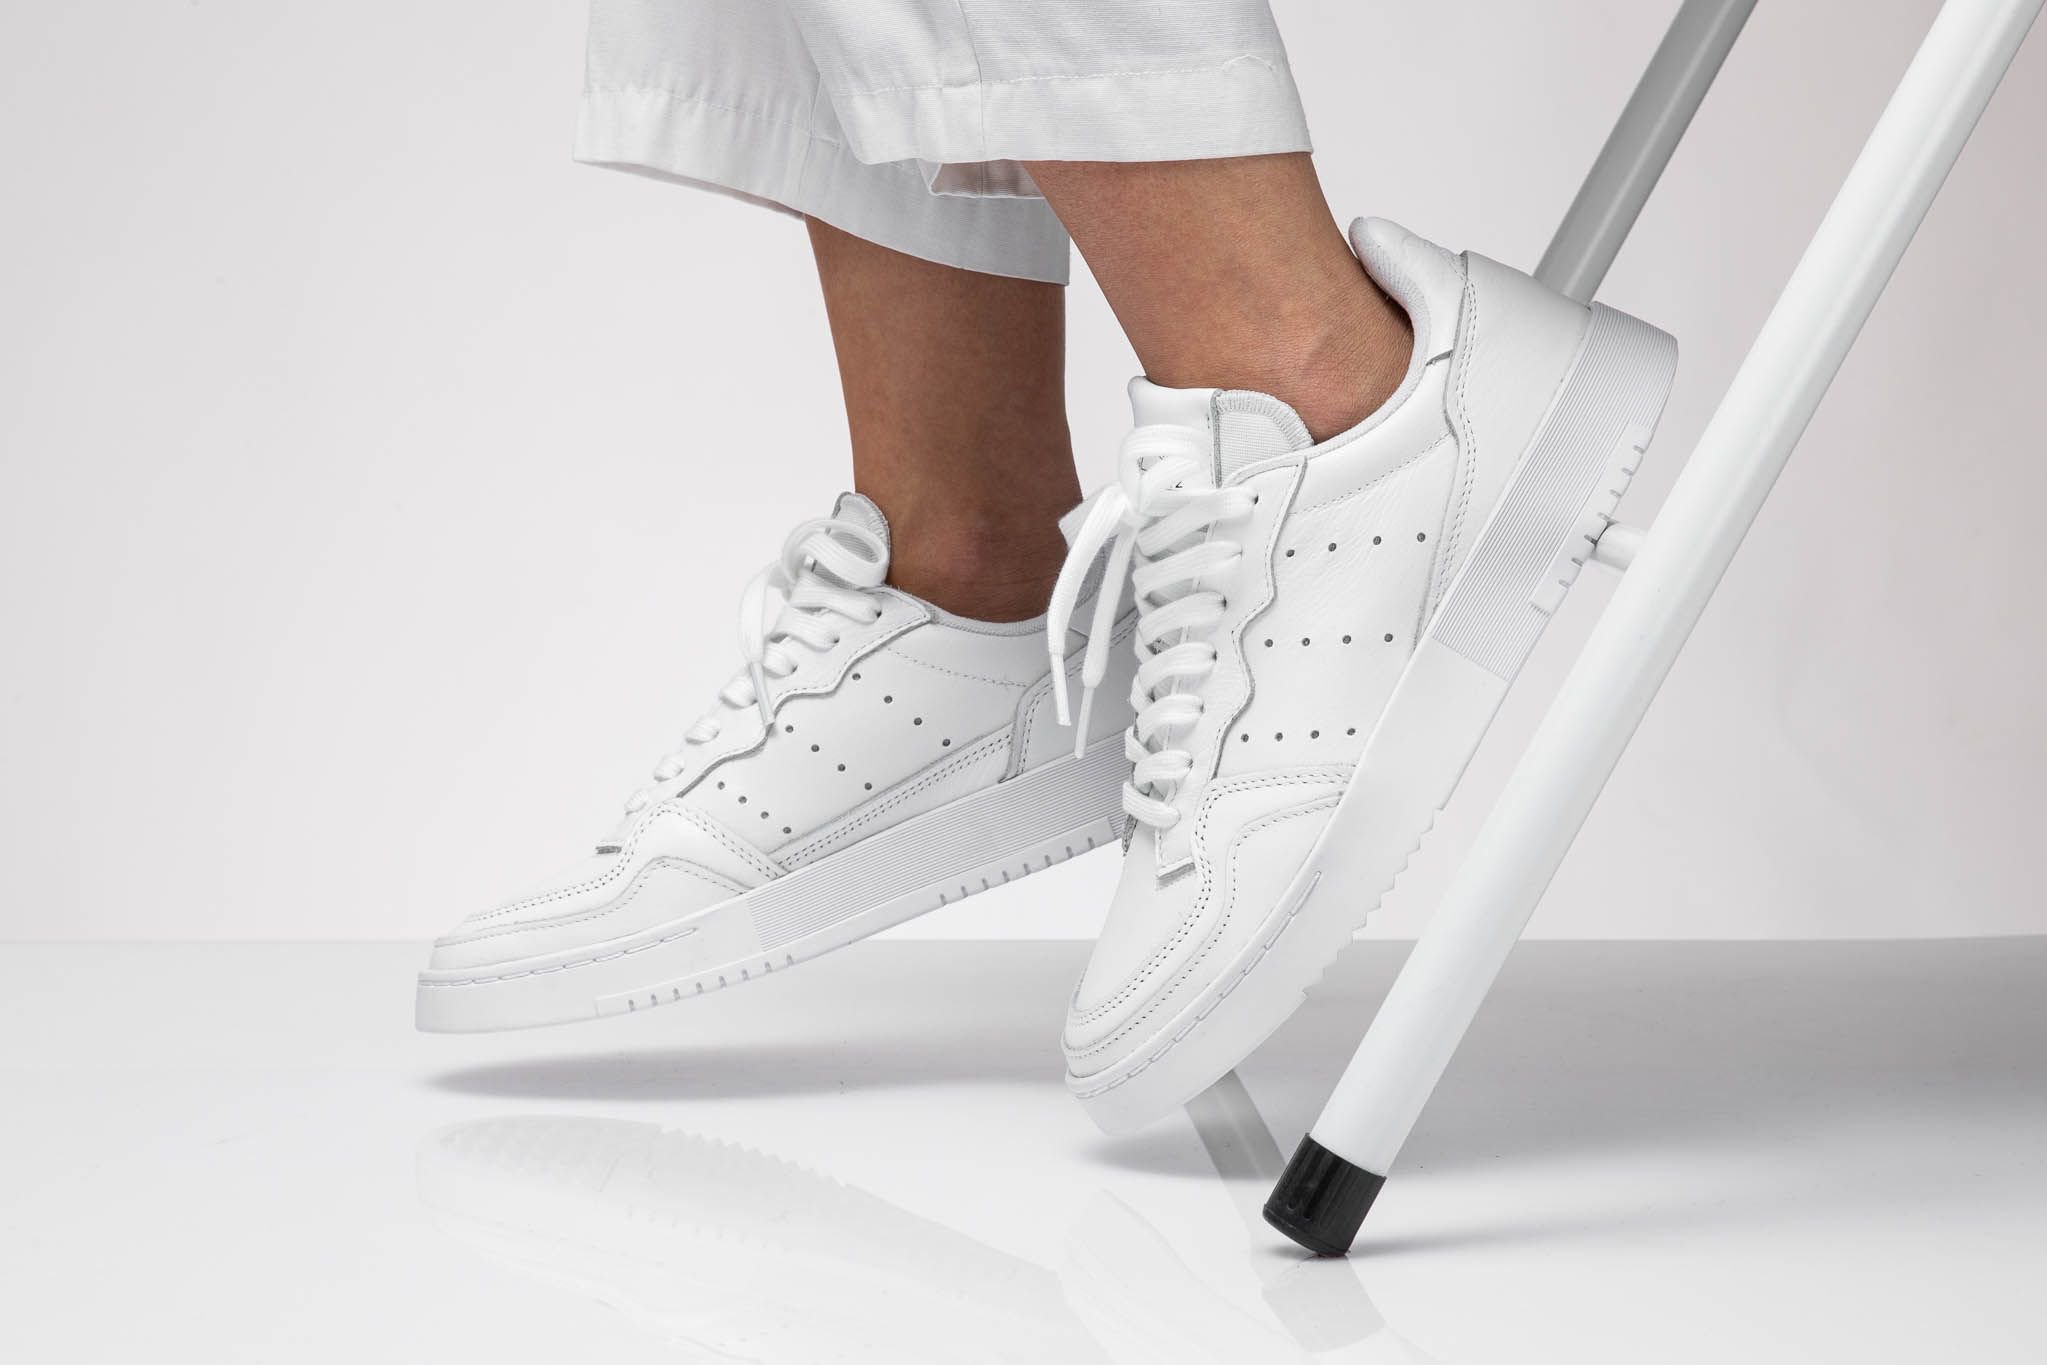 Titolo on X: "looking for a perfect summer sneaker ⚪️ try the Adidas  Supercourt in white.⁠ check it out here ➡️ https://t.co/RaIXukACIQ style  code 🔎 EE6037⁠ #adidas #adidasoriginals #teamtrefoil #showmeyourstripes # supercourt #white #